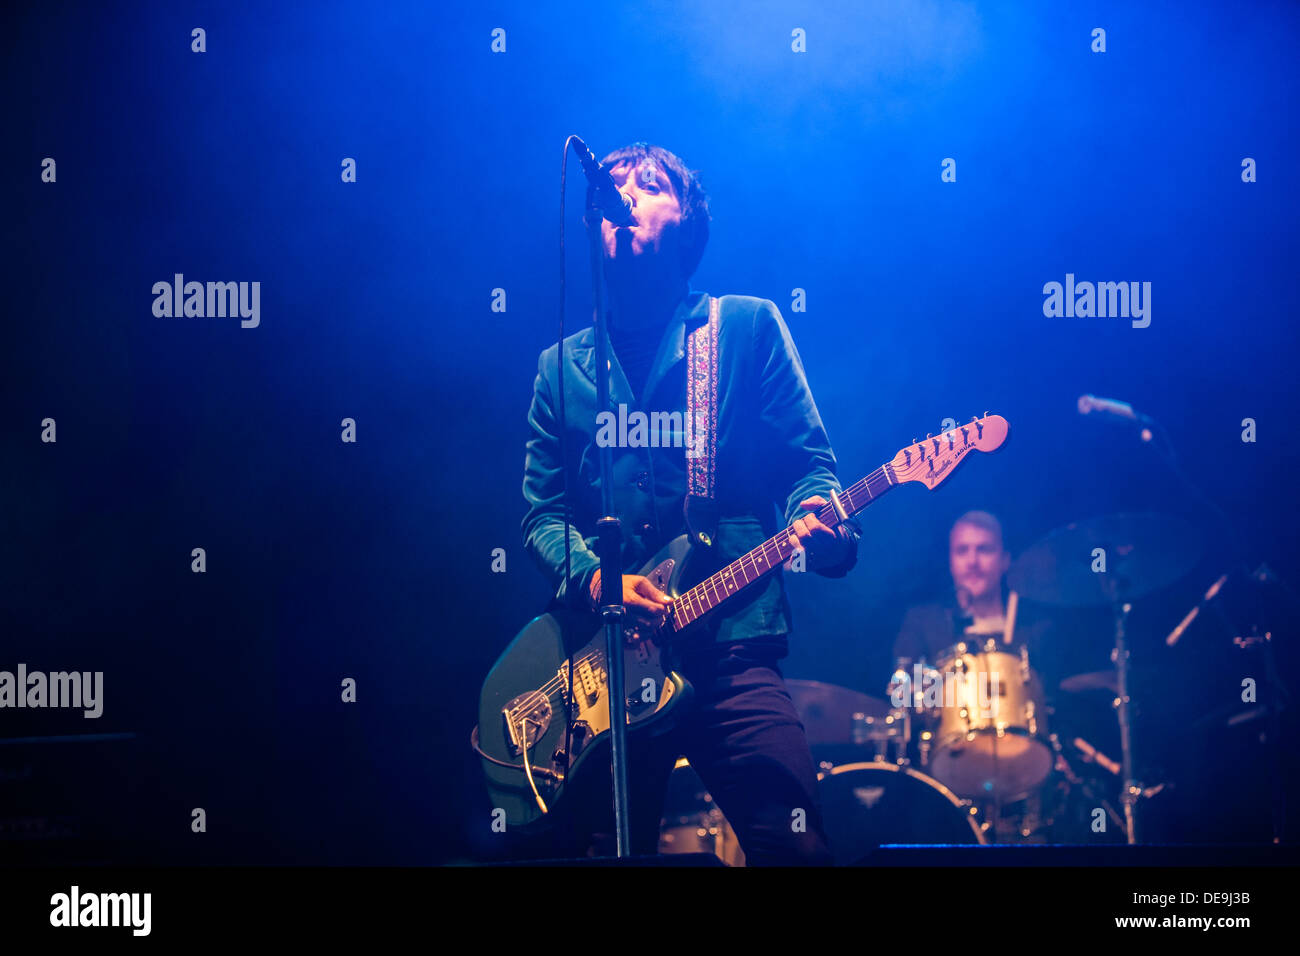 Johnny Marr live at Electric Picnic 2013 Stock Photo - Alamy